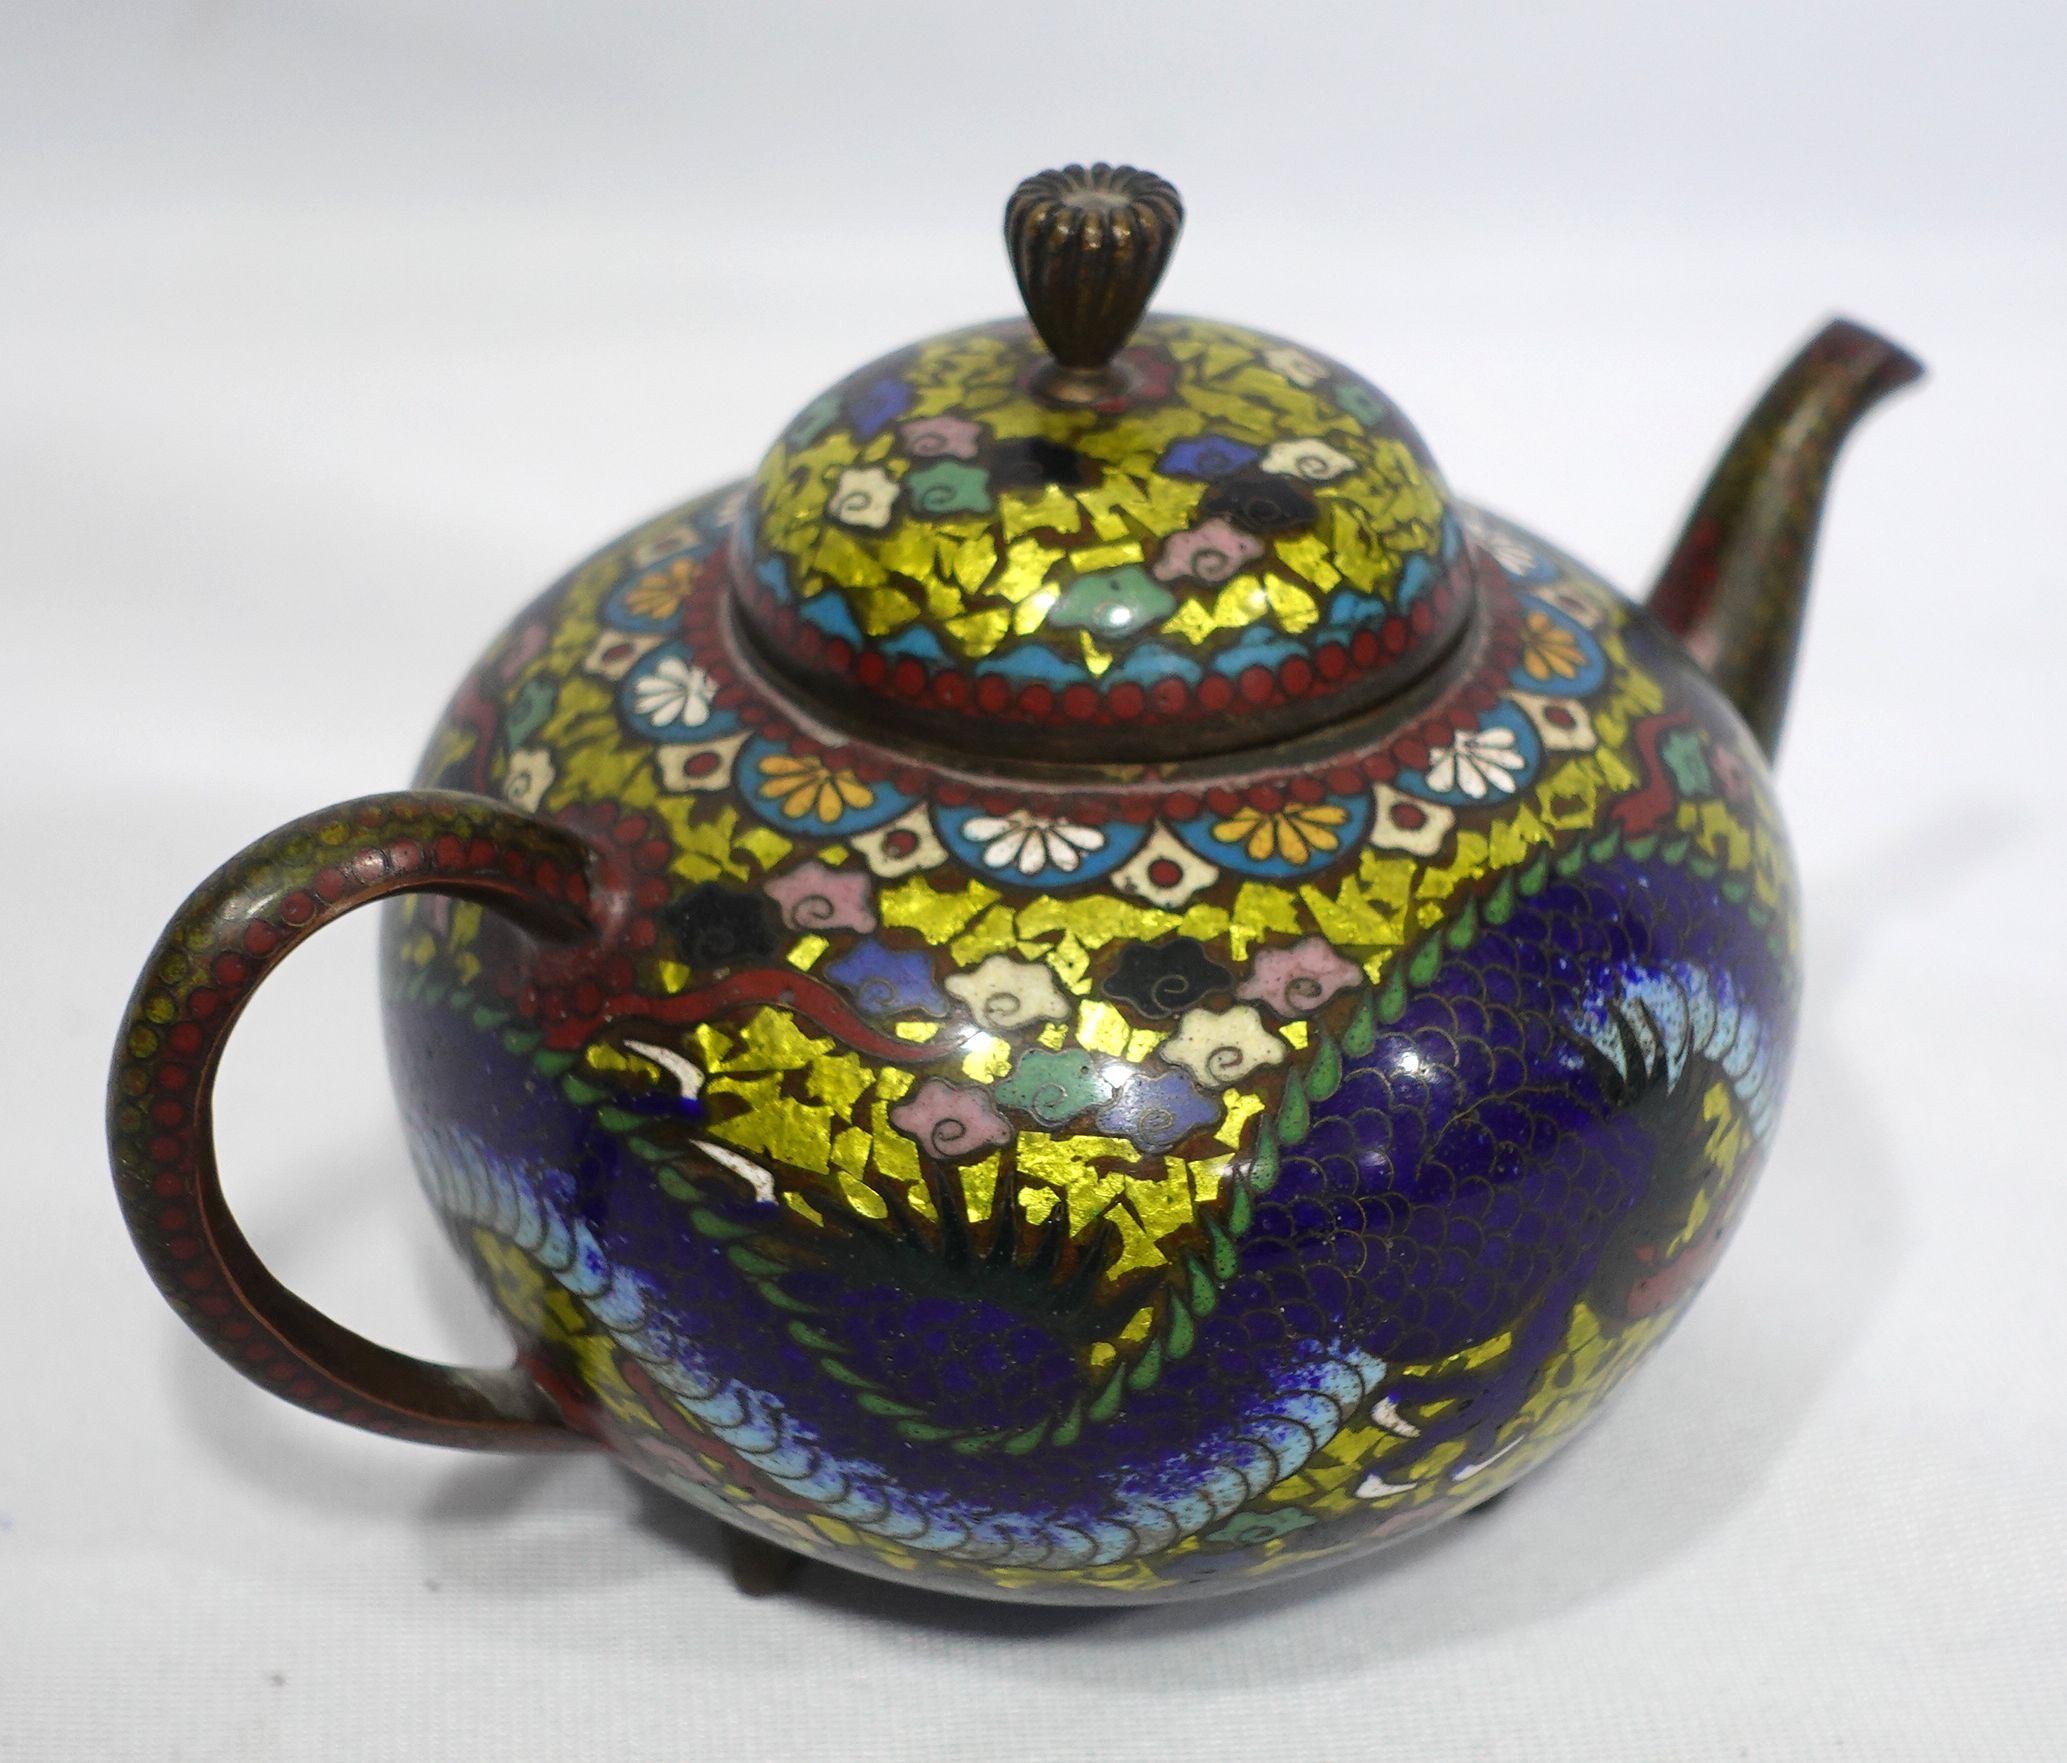 Antique Japanese Cloisonné Meiji Period Dragon Footed Teapot CO#04 In Good Condition For Sale In Norton, MA